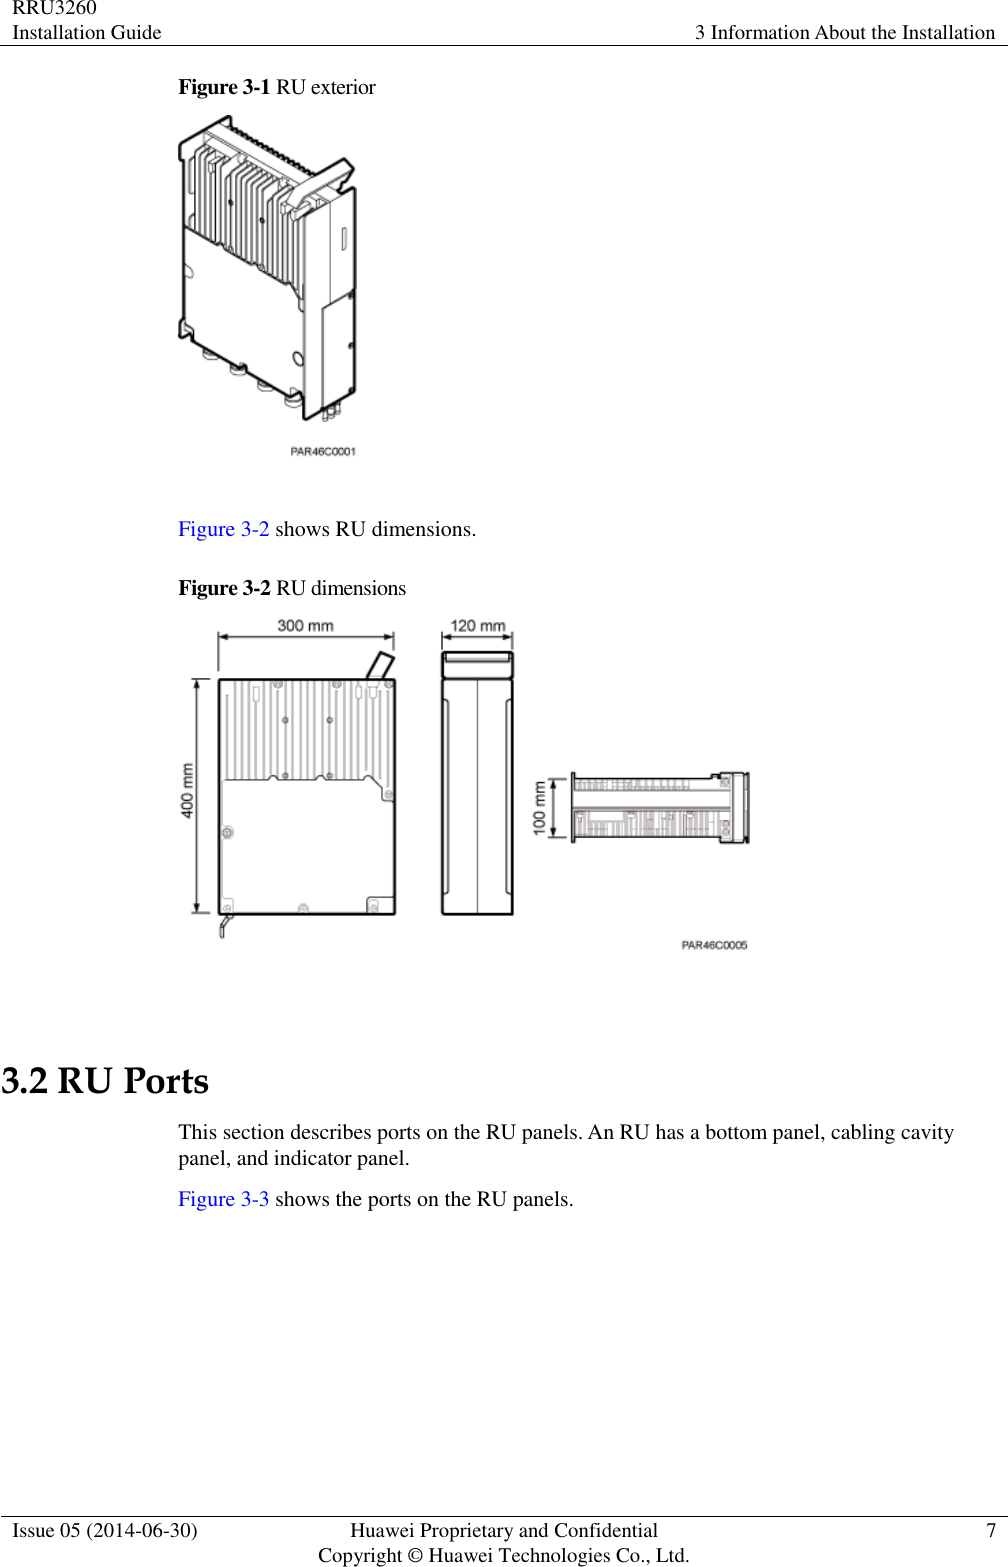 RRU3260 Installation Guide 3 Information About the Installation  Issue 05 (2014-06-30) Huawei Proprietary and Confidential                                     Copyright © Huawei Technologies Co., Ltd. 7  Figure 3-1 RU exterior   Figure 3-2 shows RU dimensions. Figure 3-2  RU dimensions   3.2 RU Ports This section describes ports on the RU panels. An RU has a bottom panel, cabling cavity panel, and indicator panel. Figure 3-3 shows the ports on the RU panels. 